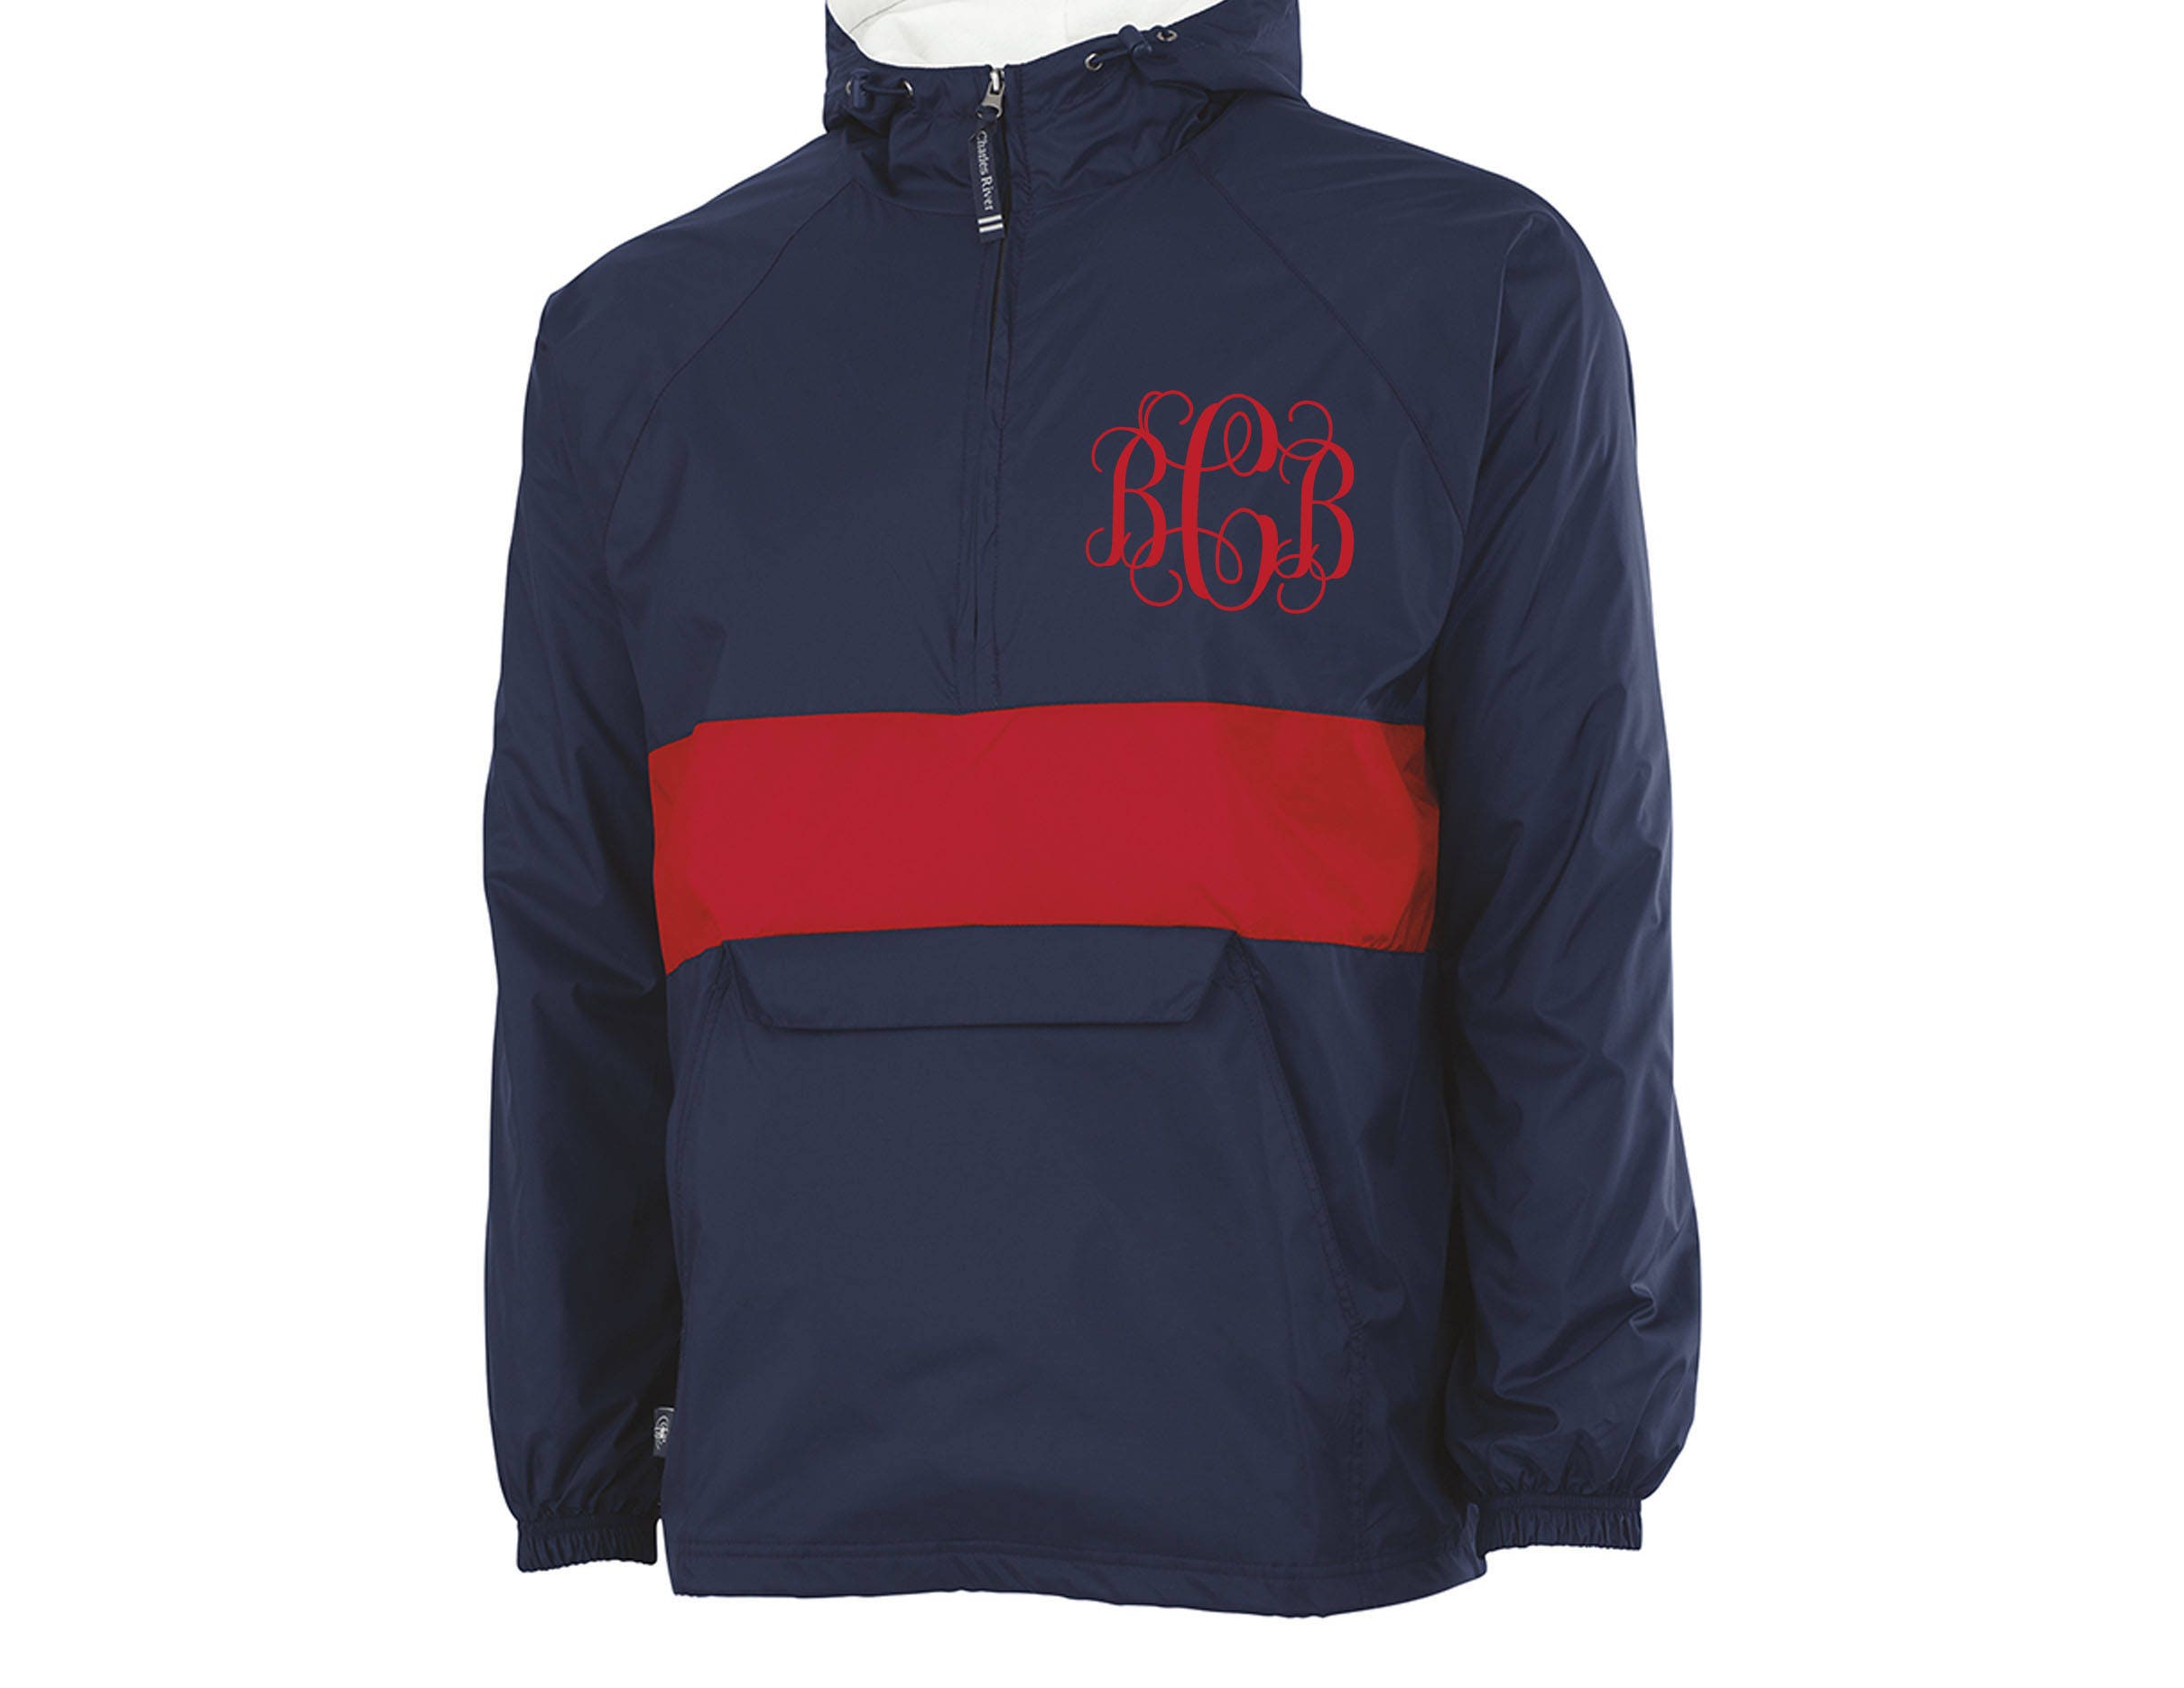 Pullover Windbreaker Jacket With Monogram Personalized Rugby 